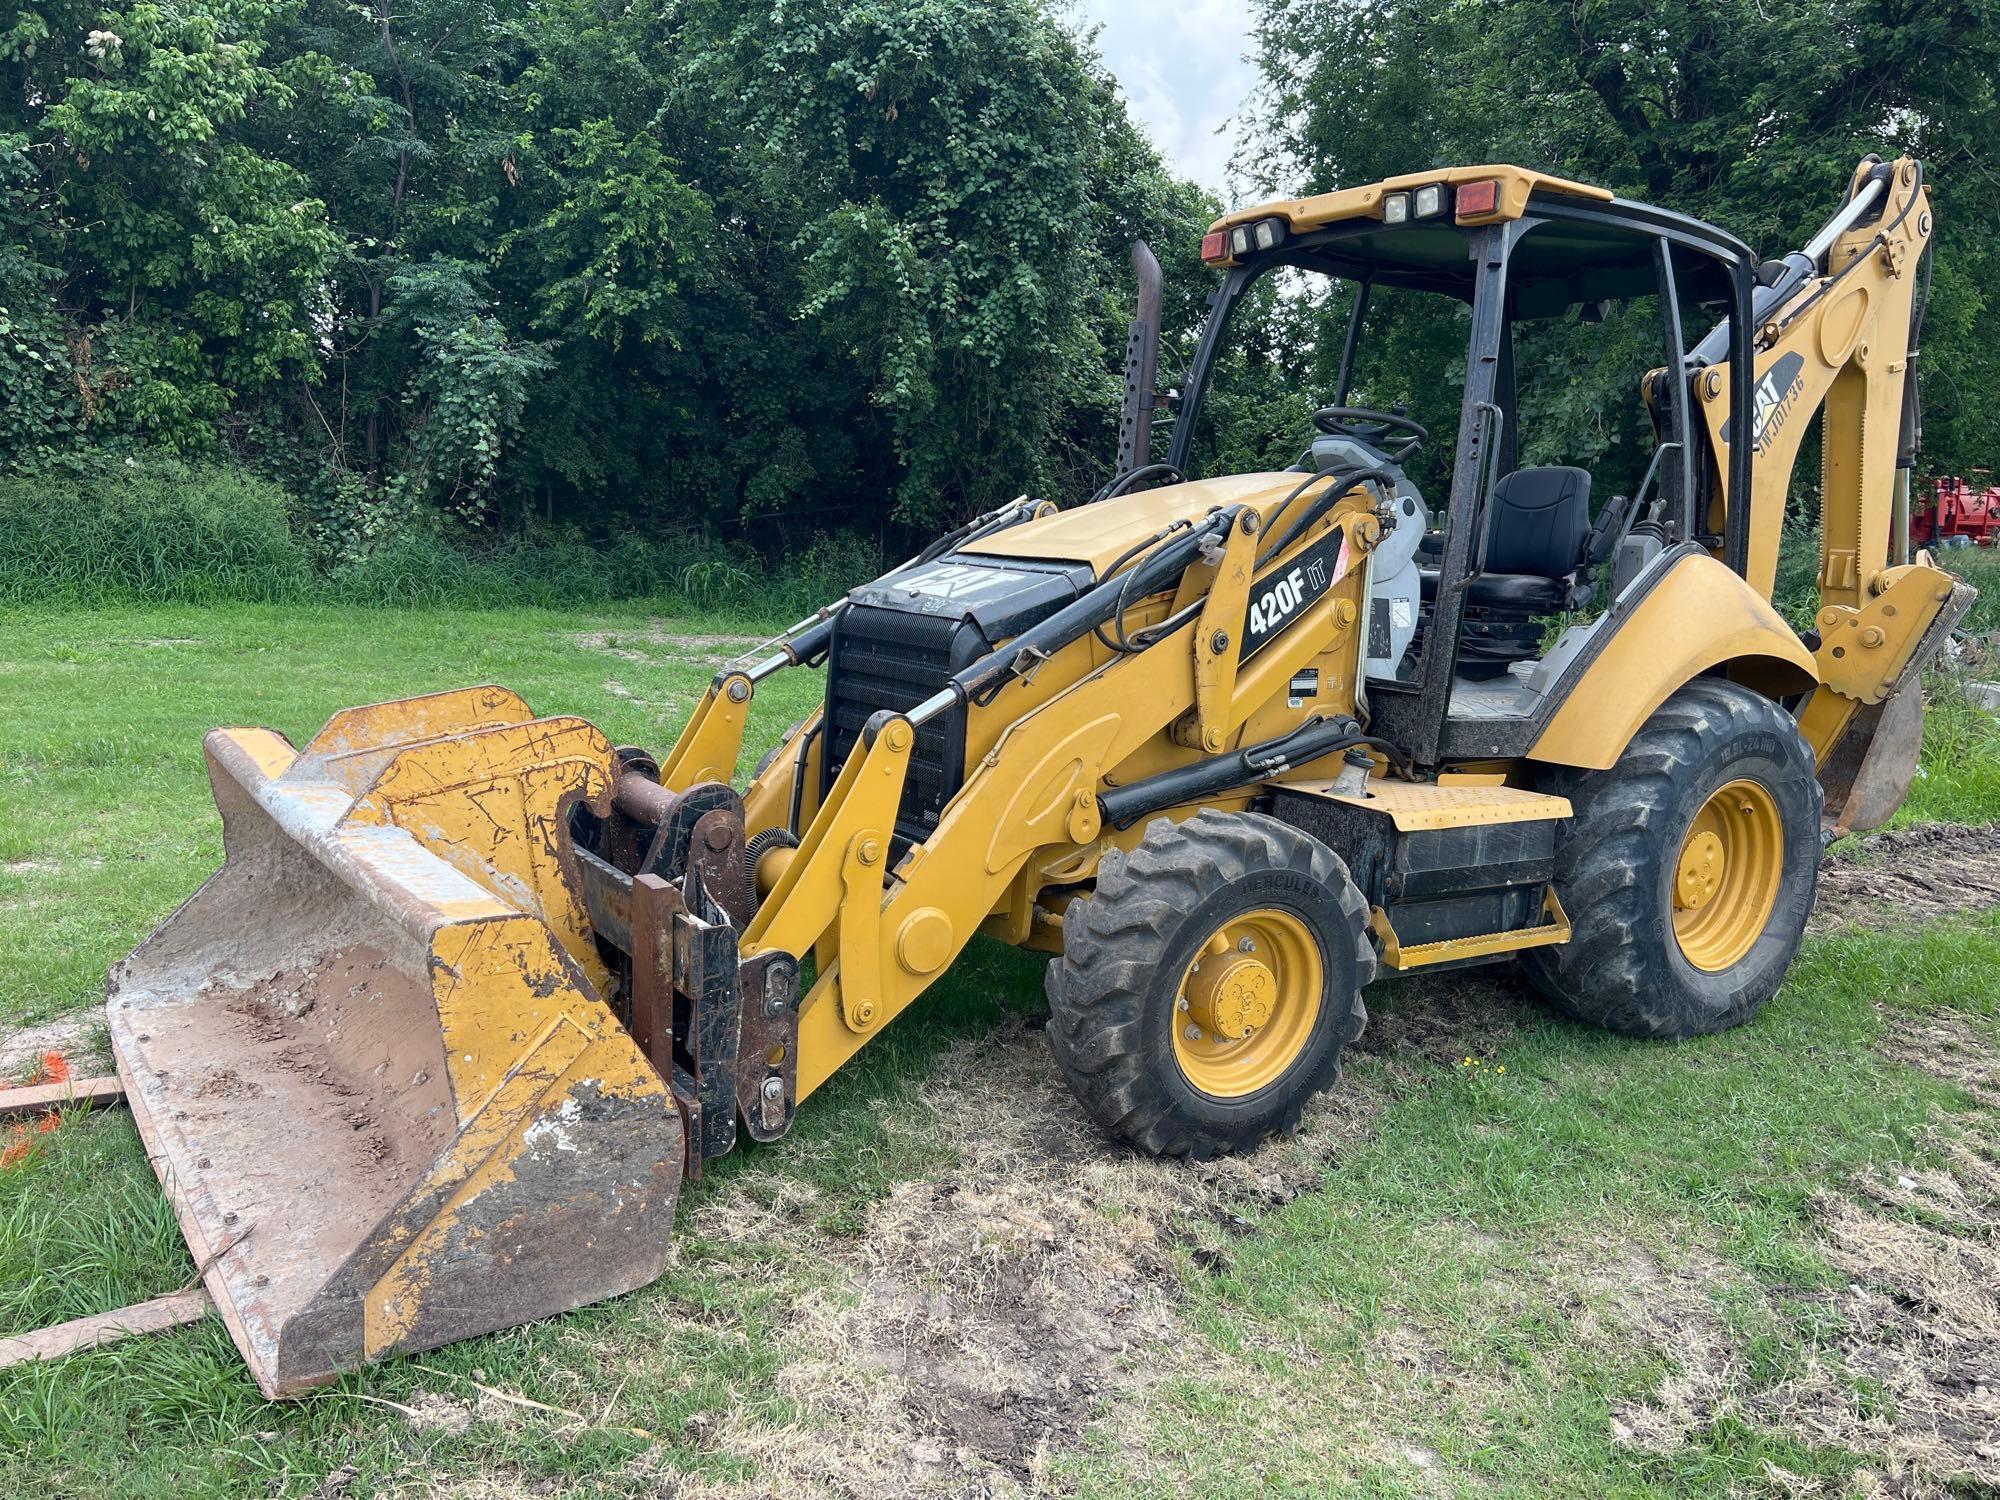 2013 CAT 420F2IT TRACTOR LOADER BACKHOE SN:JWJ01736 4x4, powered by Cat diesel engine, equipped with